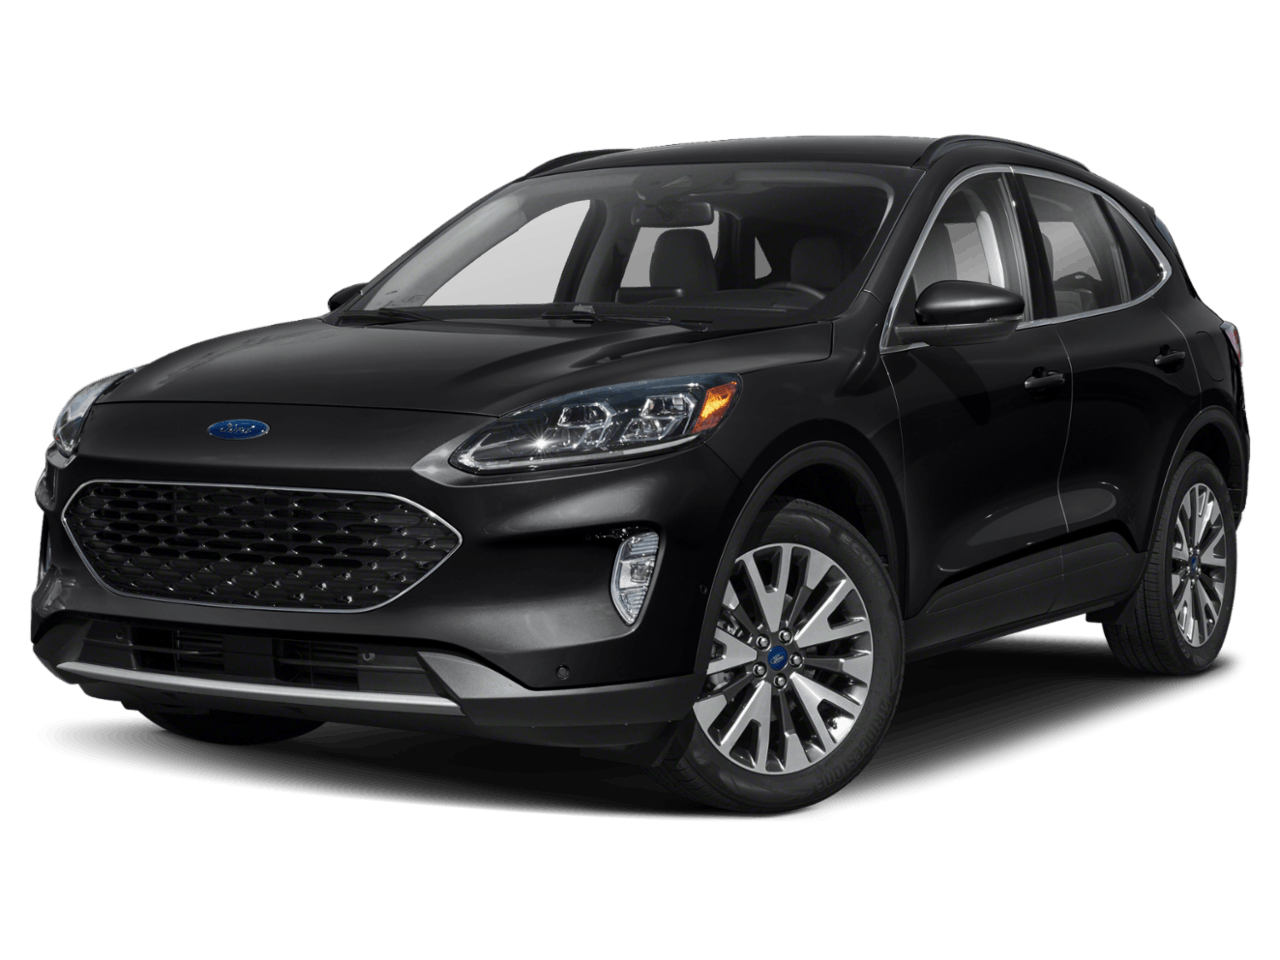 Used 2020 Ford Escape Titanium with VIN 1FMCU9J9XLUB08122 for sale in Waite Park, Minnesota